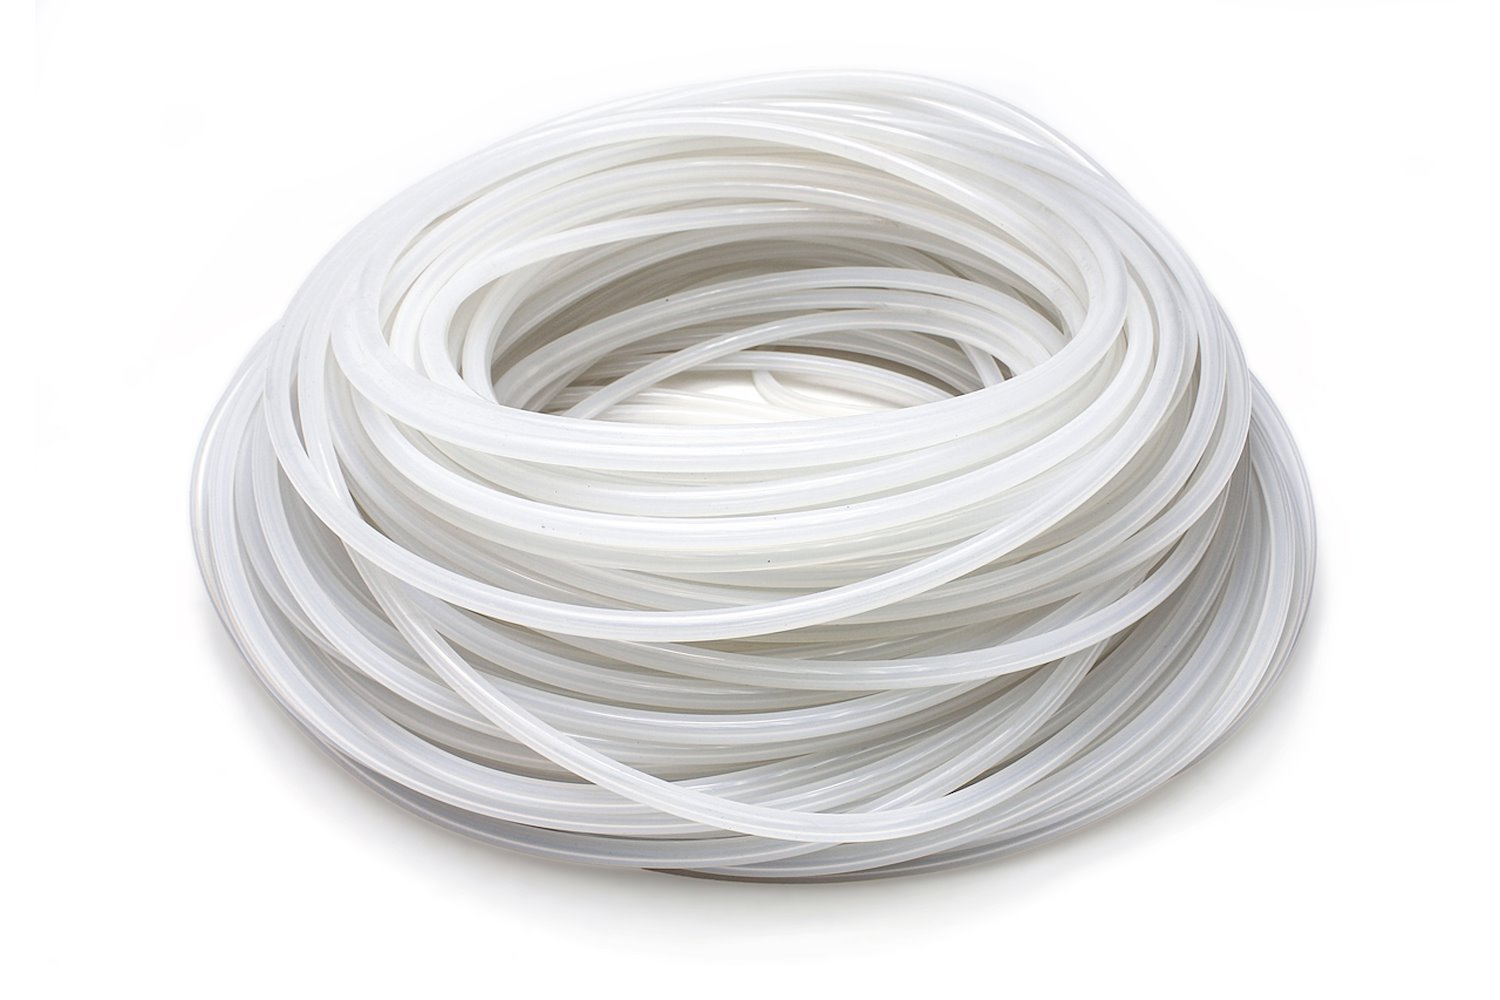 HTSVH95-CLEARx50 High-Temperature Silicone Vacuum Hose Tubing, 3/8 in. ID, 50 ft. Roll, Clear